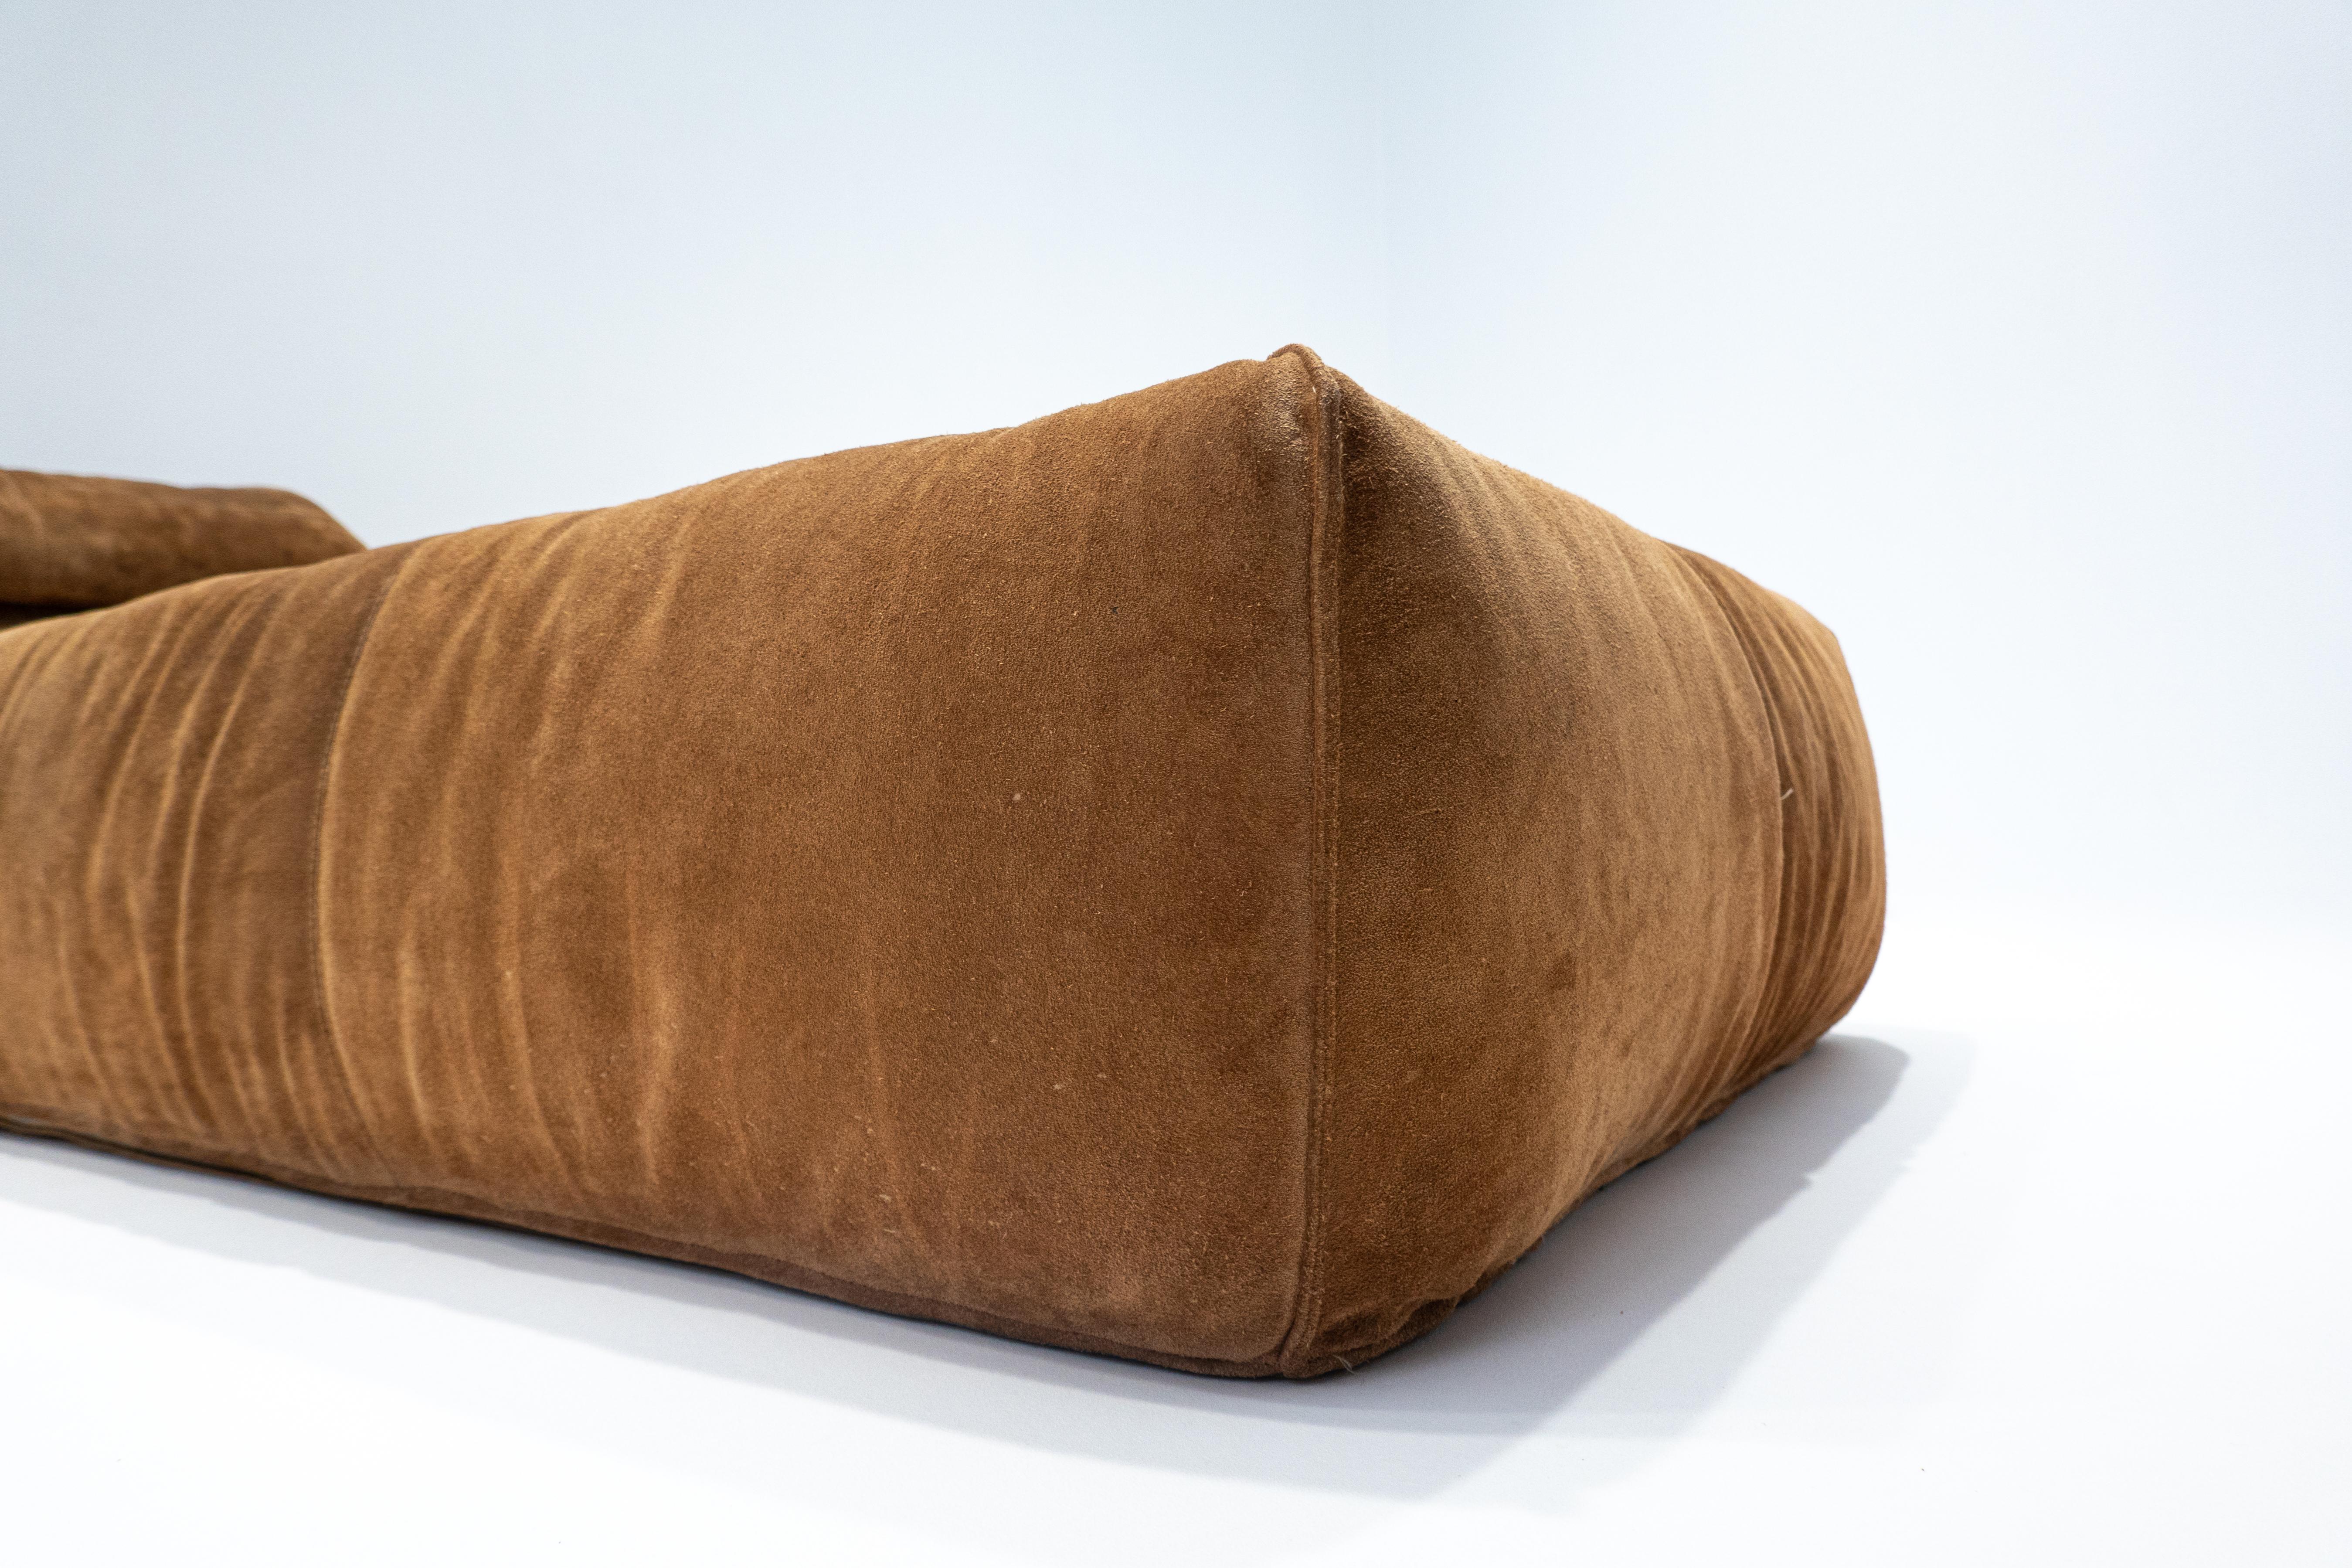 Mid-Century Modern Bambole Daybed by Mario Bellini, Suede, C&B Italia, 1970s For Sale 1